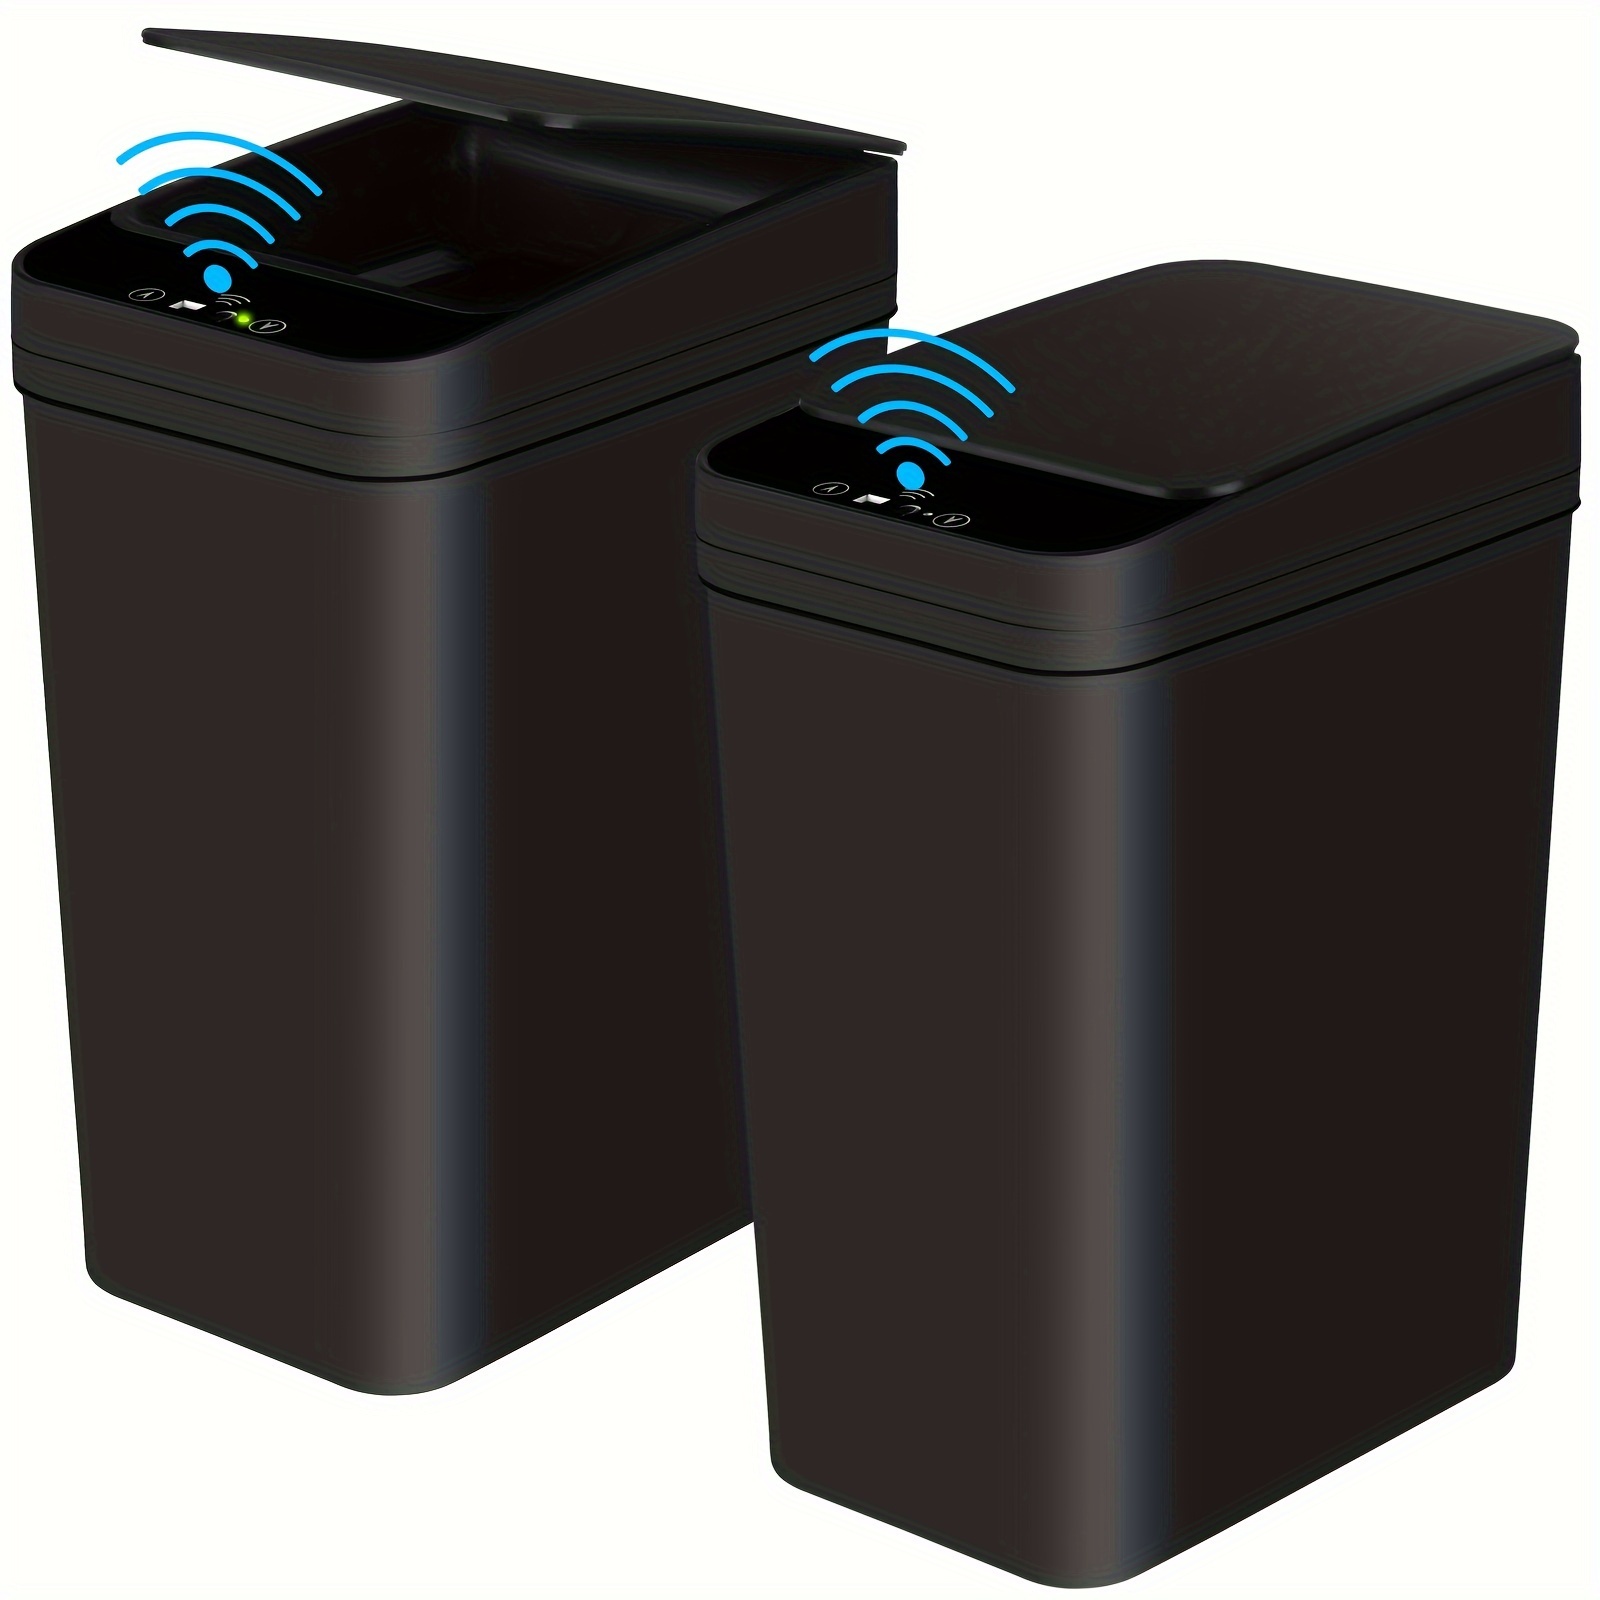 

2 Pack 2.2 Gallon Bathroom Automatic Trash Can Touchless Motion Sensor Small Slim Garbage Can With Lid Smart Electric Narrow Garbage Bin For Bedroom Office Kitchen (black)